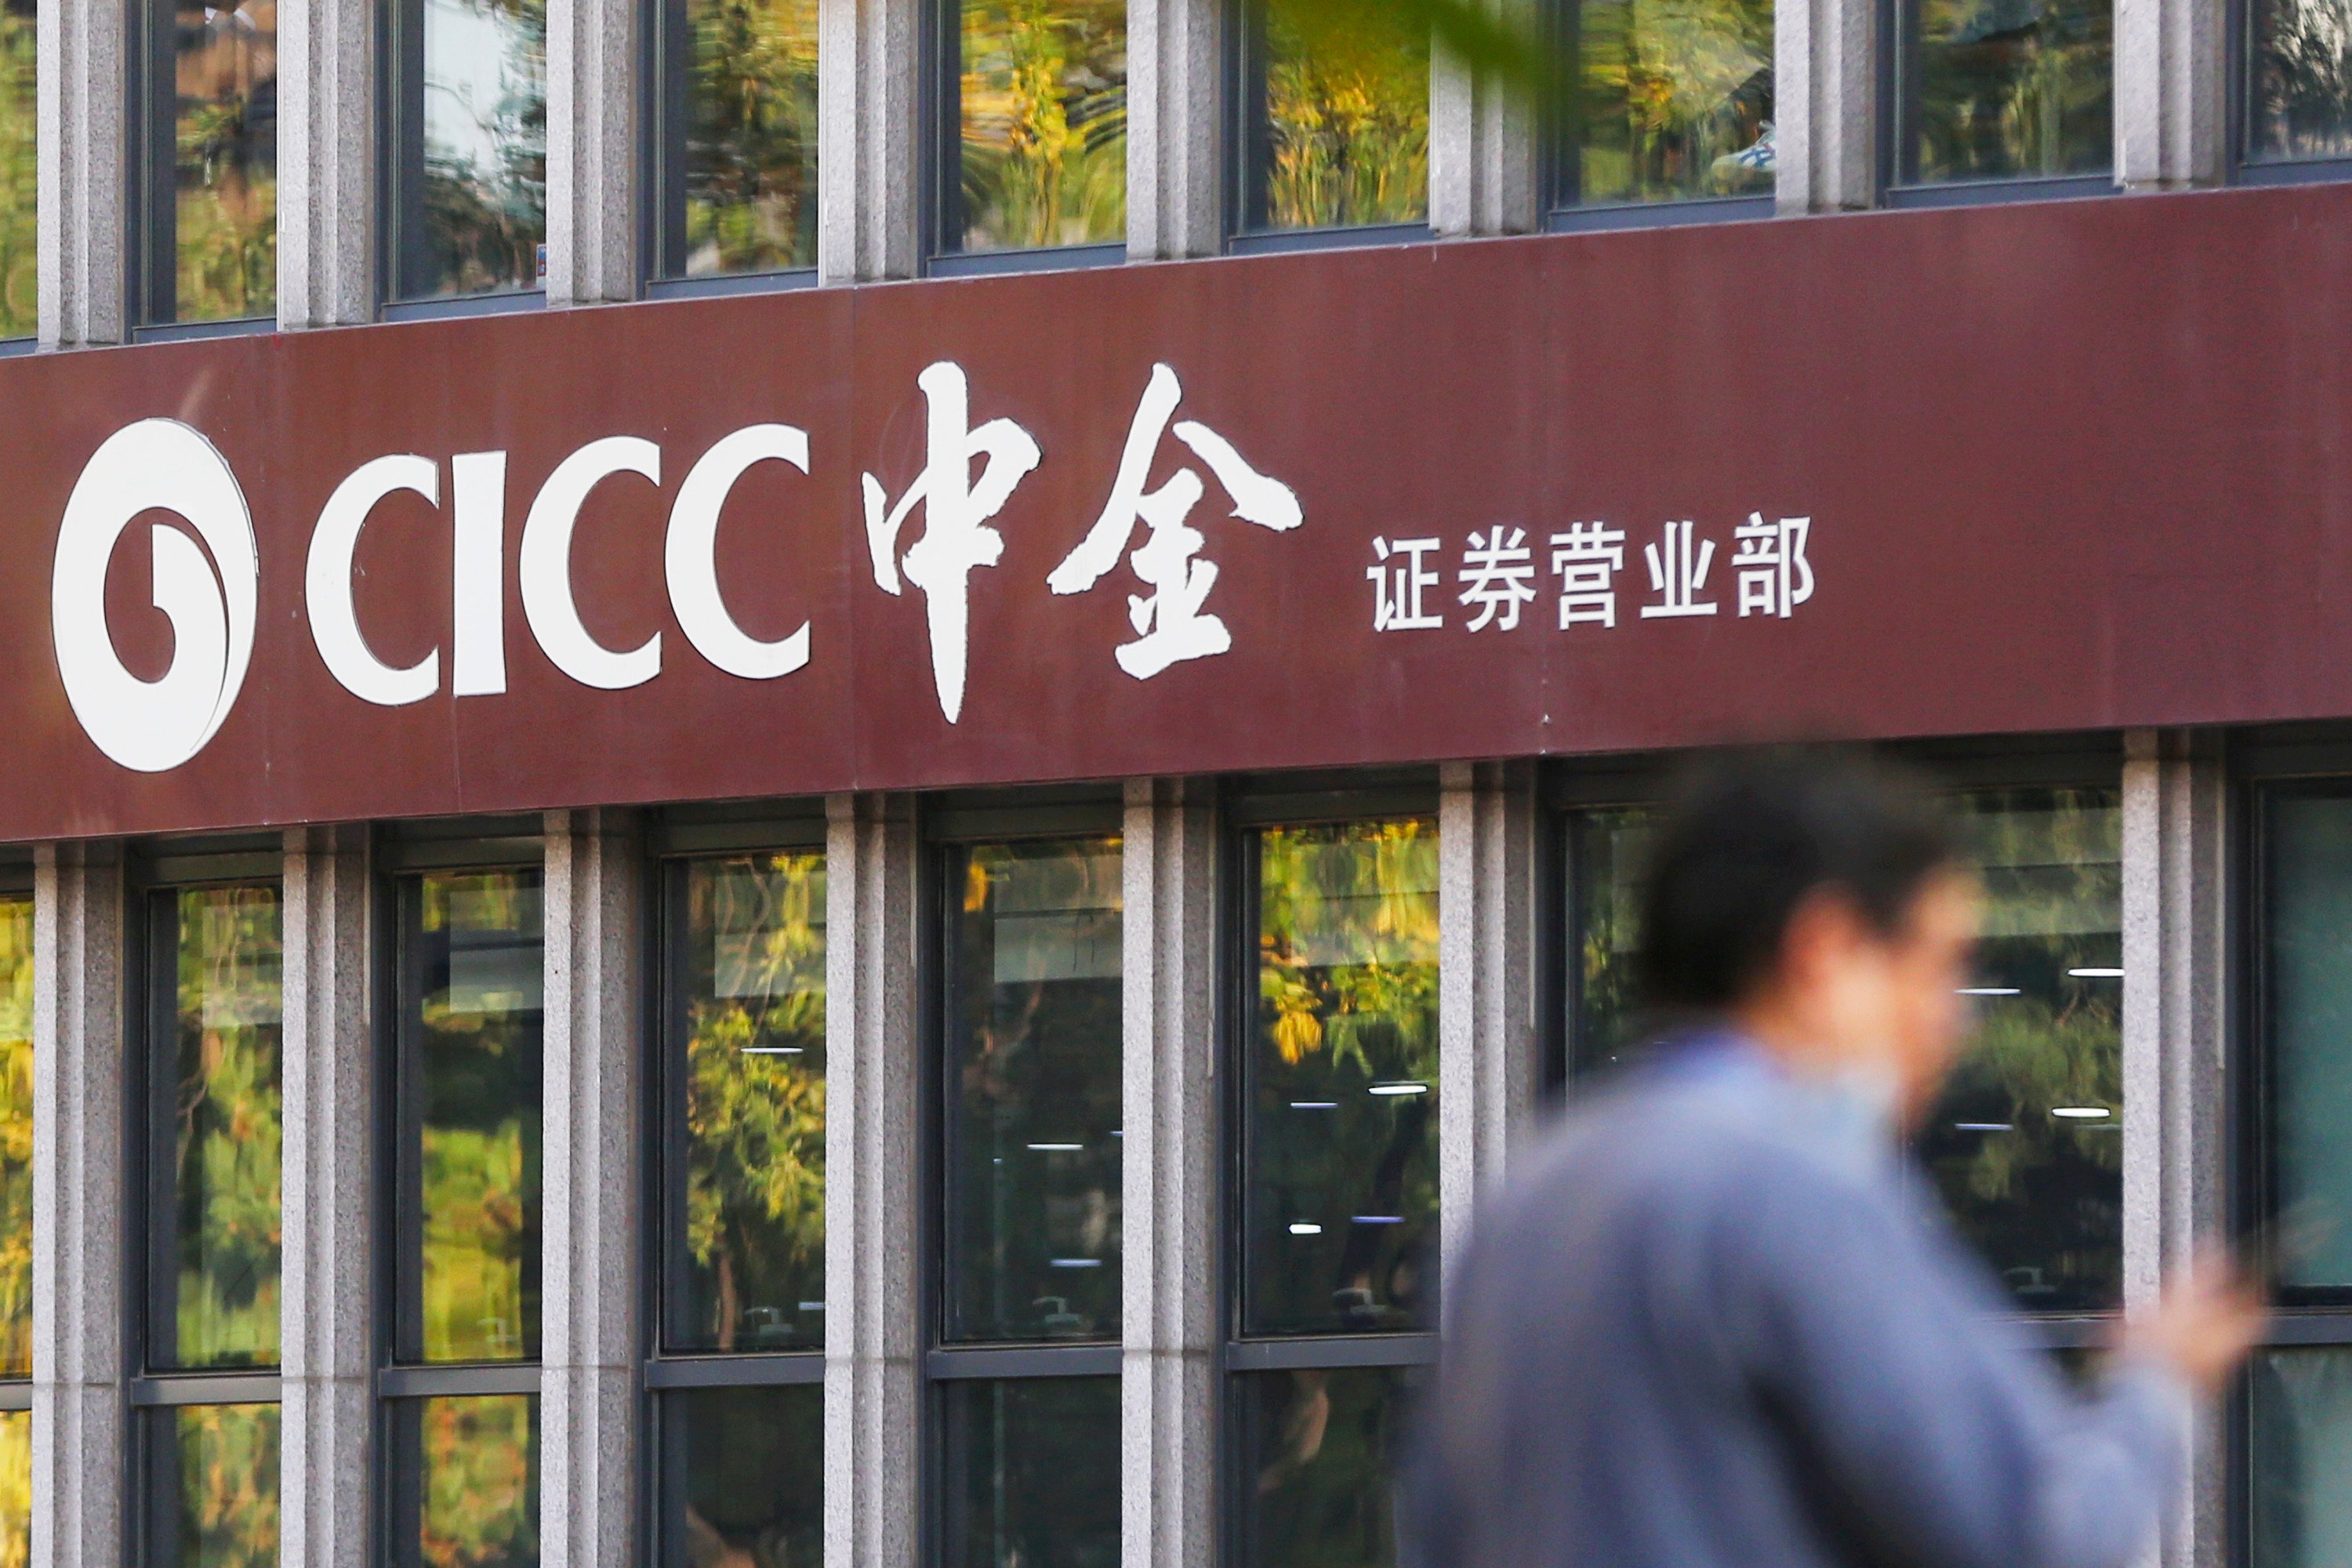 Securities business department of China International Capital Corporation Limited (CICC) is pictured at the Guomao area on October 28, 2020 in Beijing, China. Photo: Getty Images